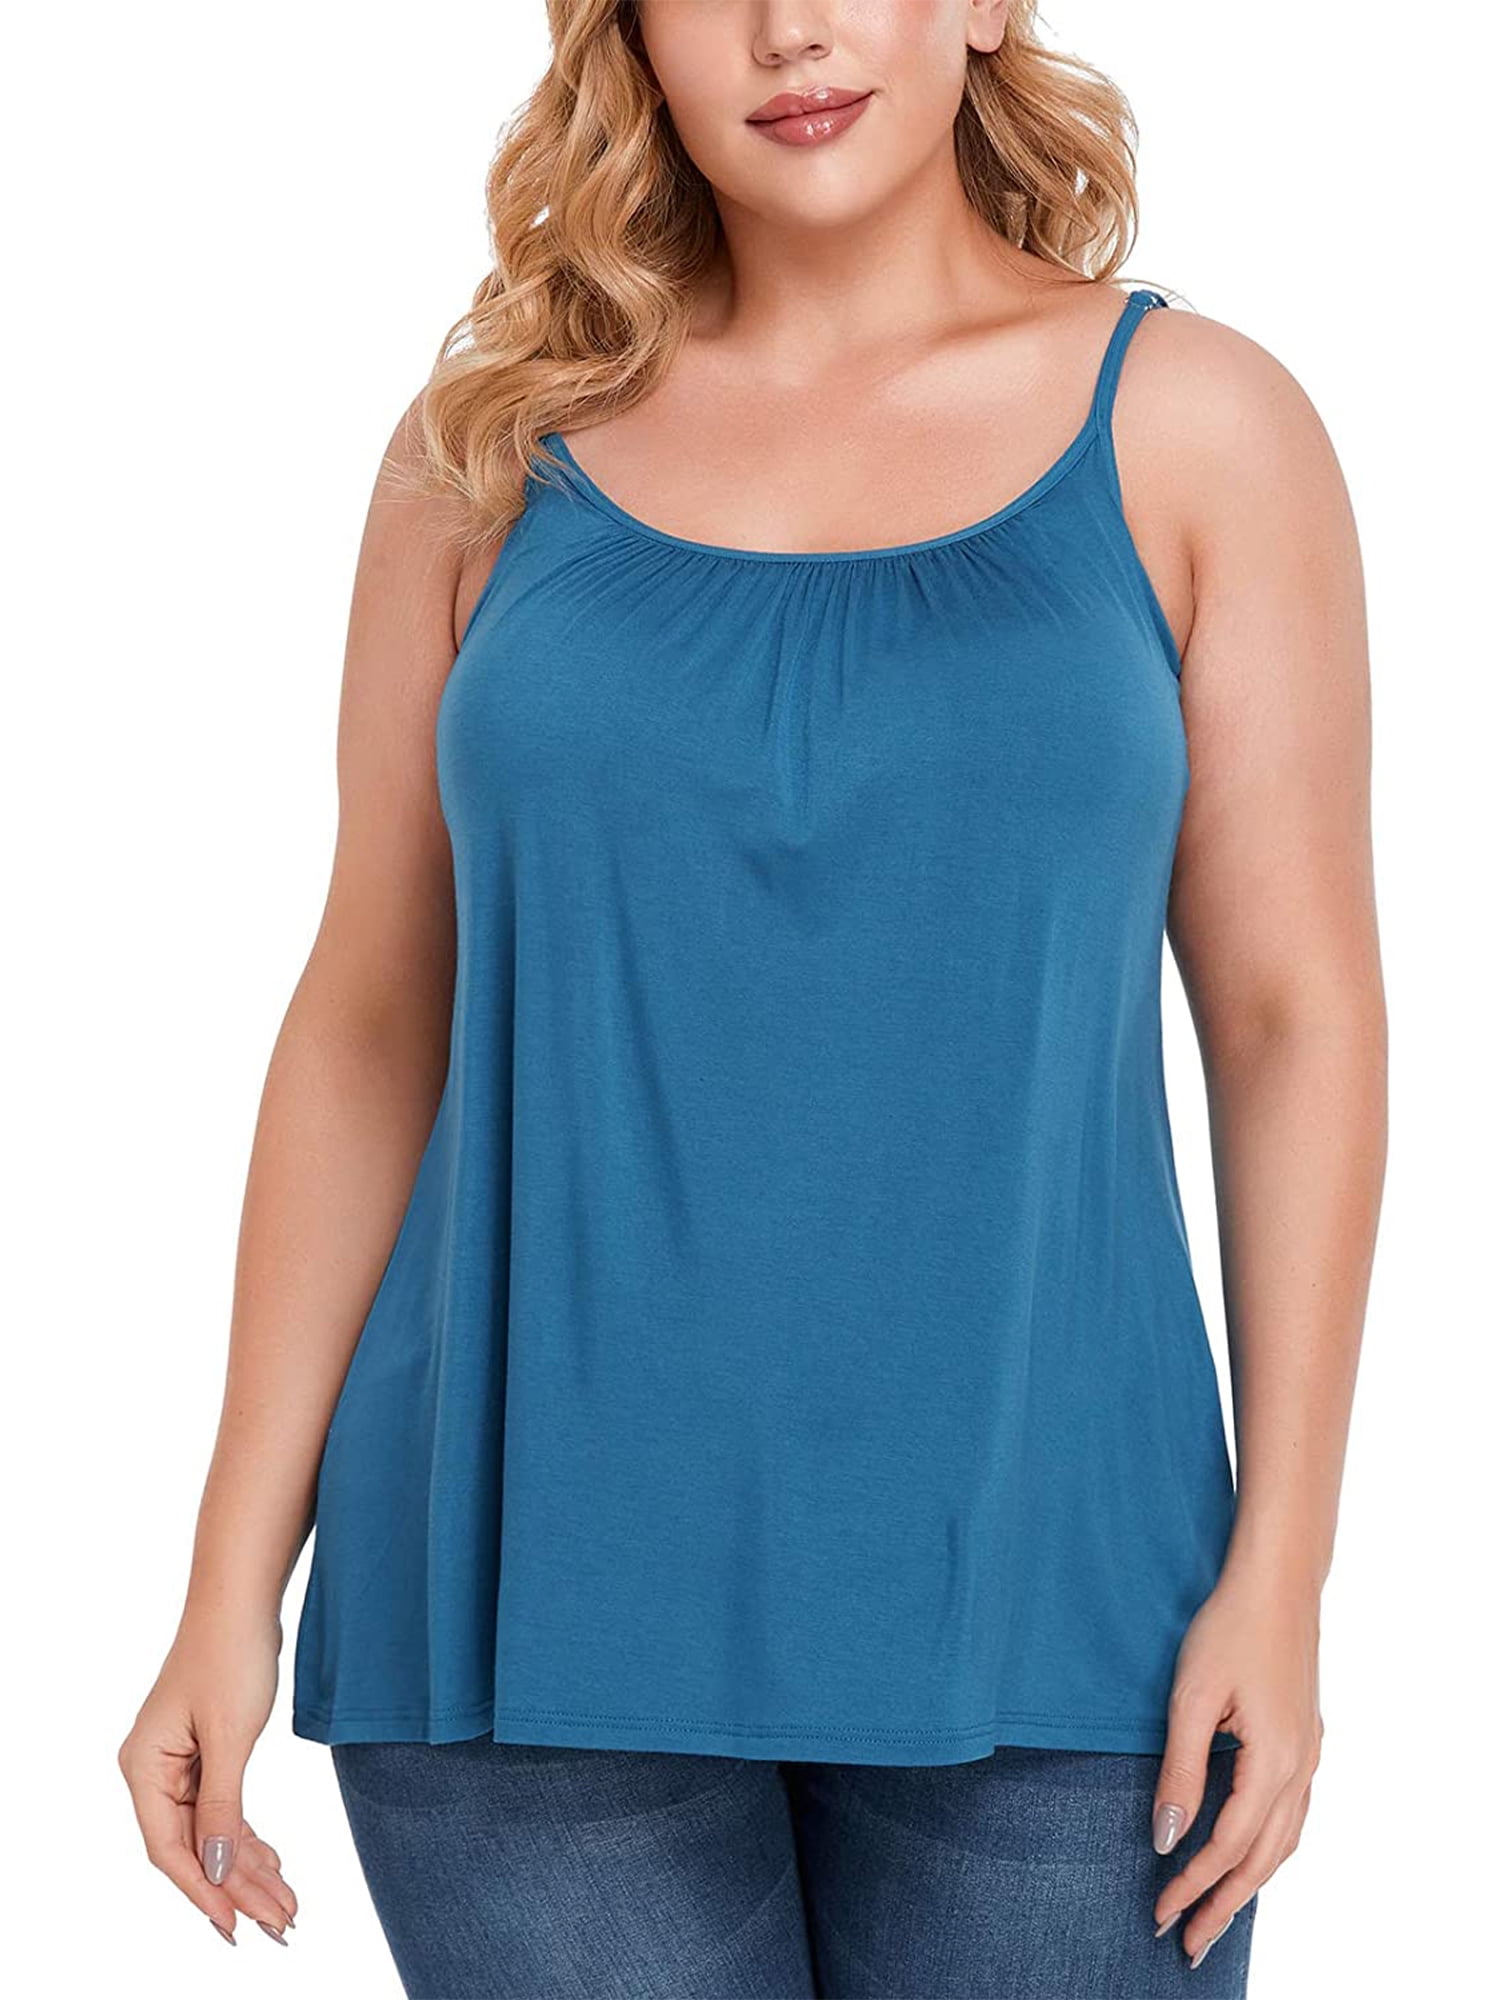 FITVALEN Women's Camisole with Built in Bra Plus Size Casual